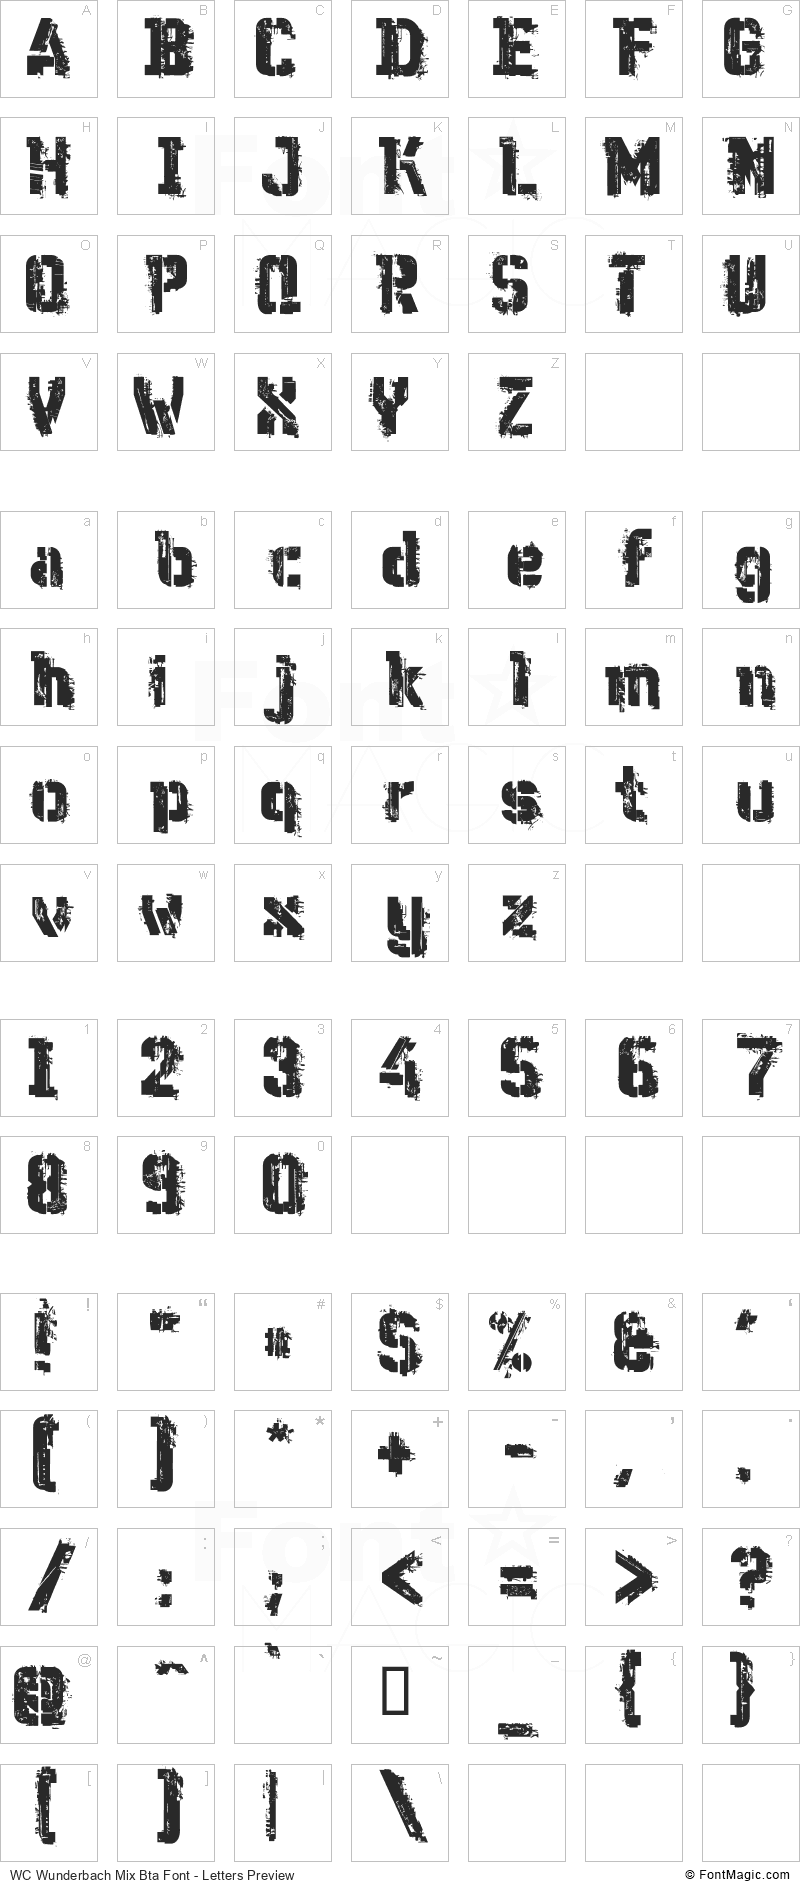 WC Wunderbach Mix Bta Font - All Latters Preview Chart